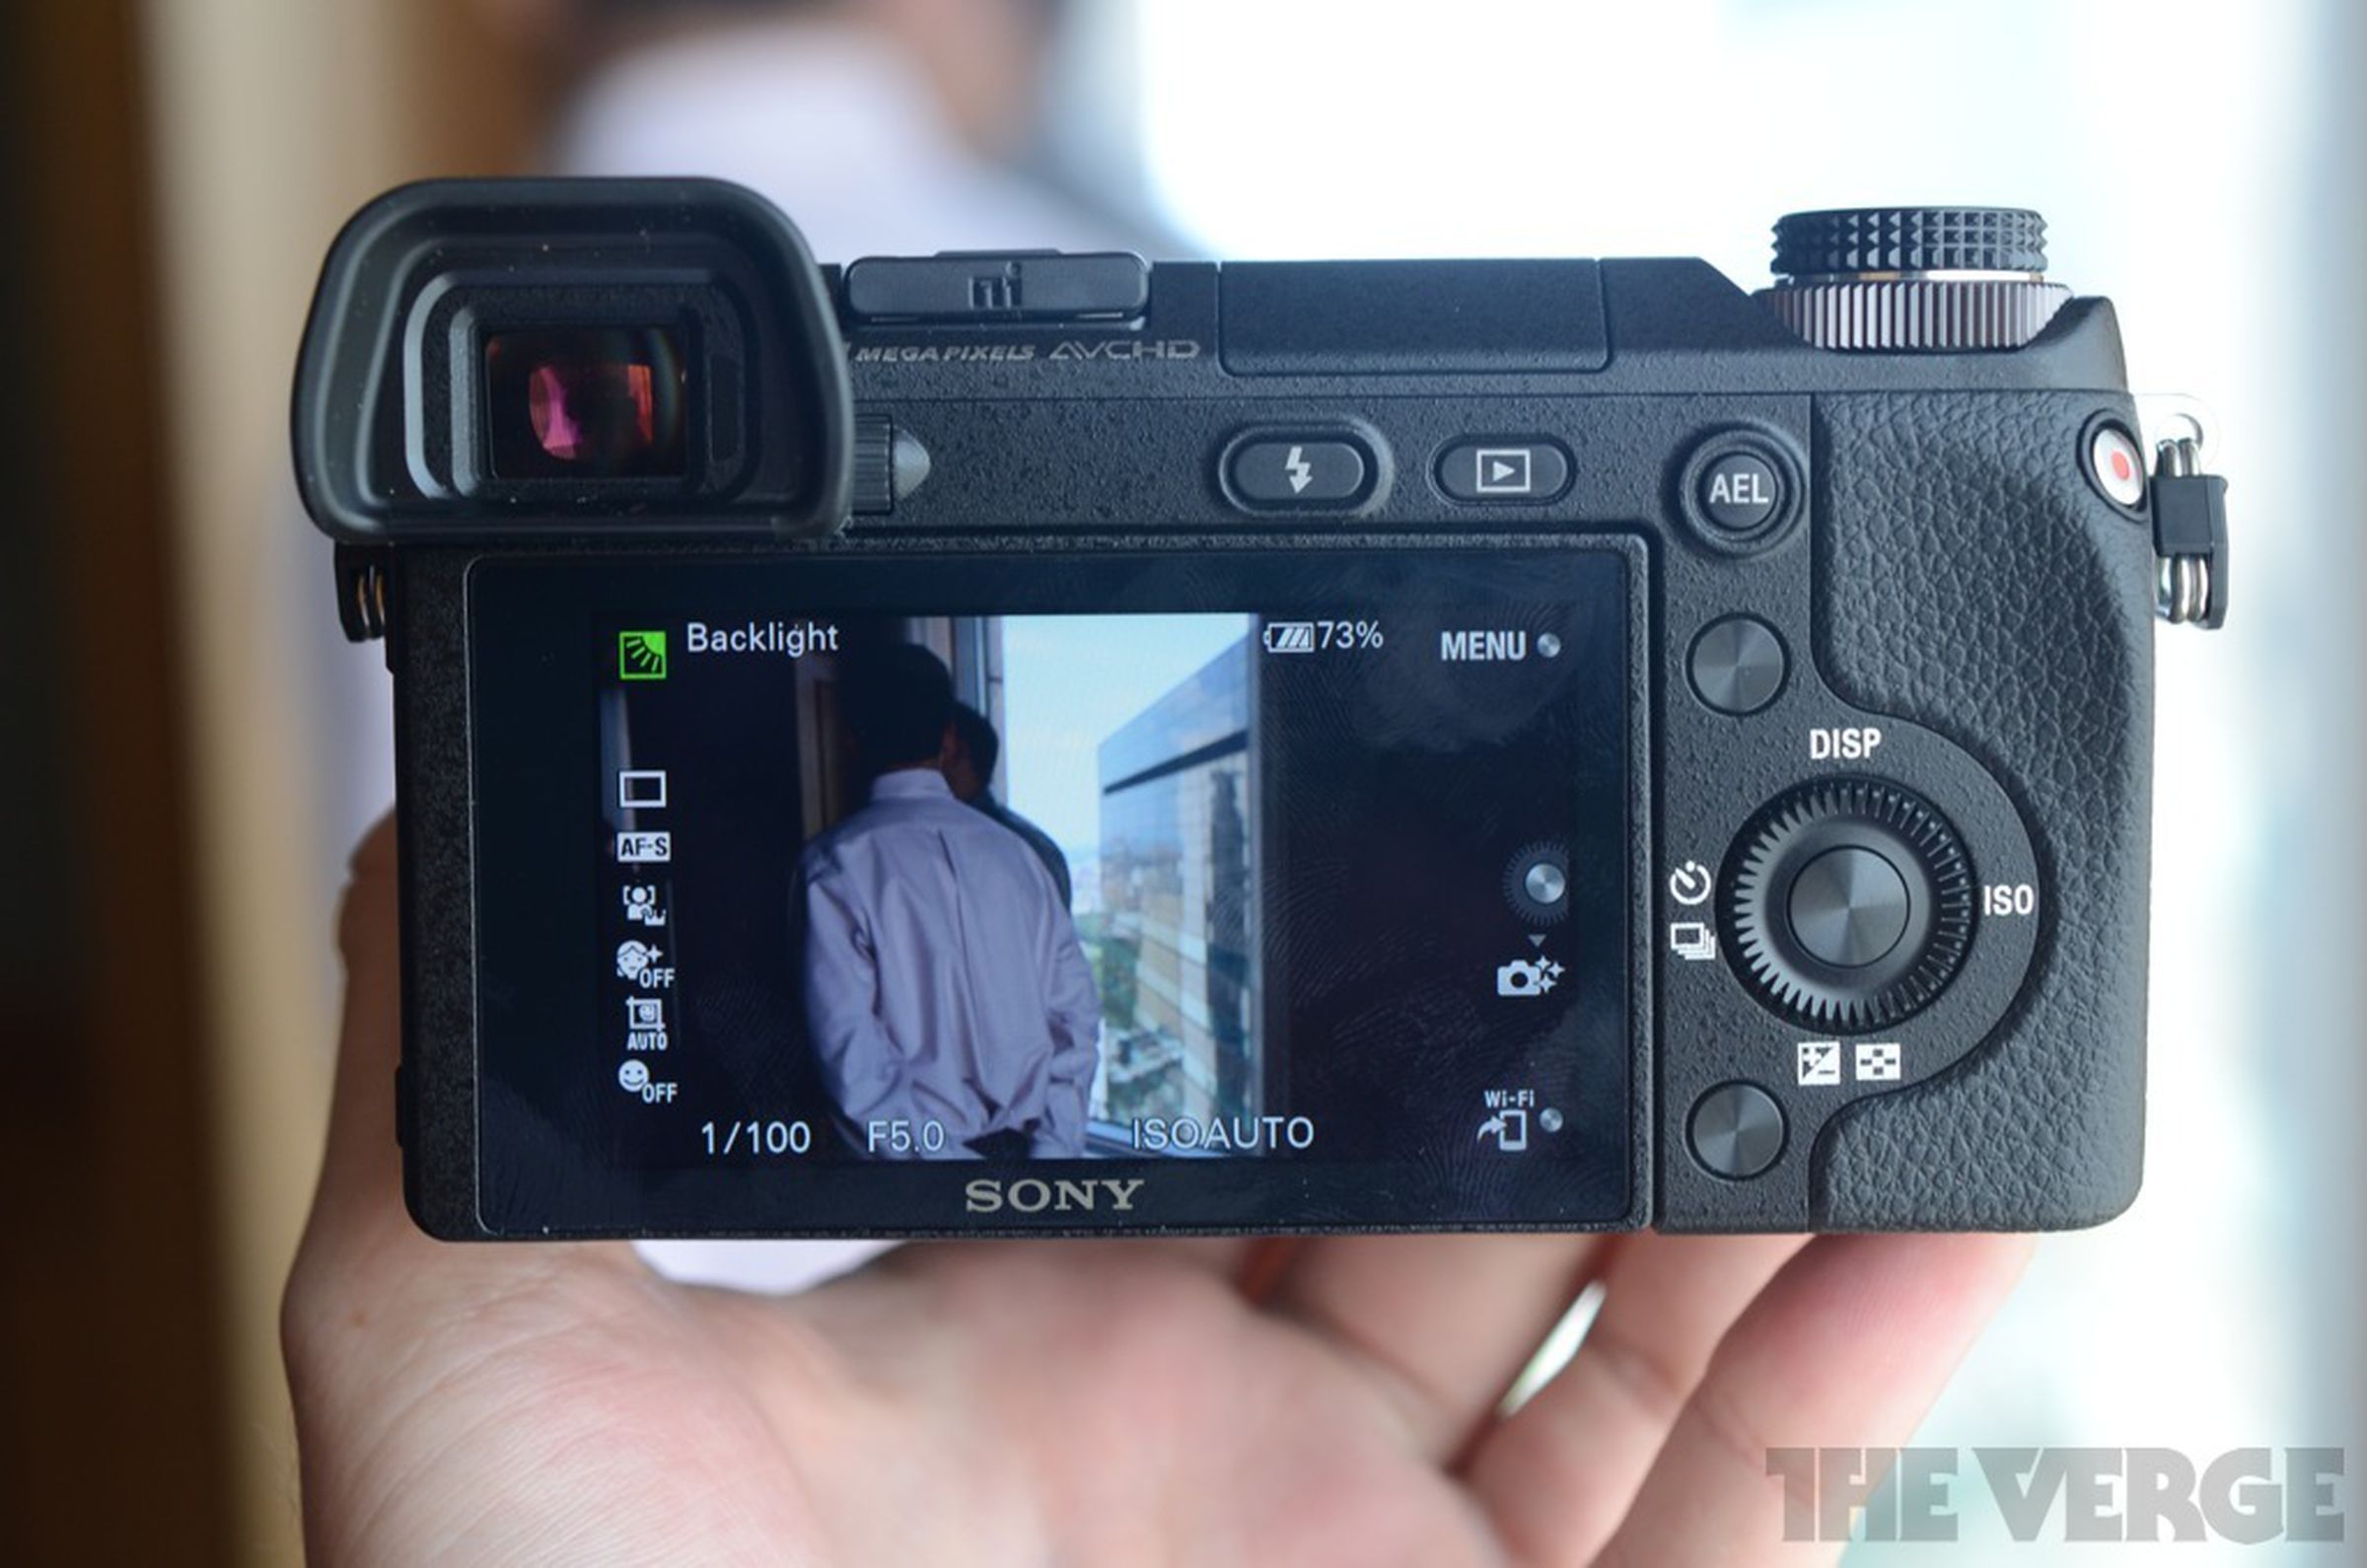 Sony NEX-6 hands-on photos and press shots